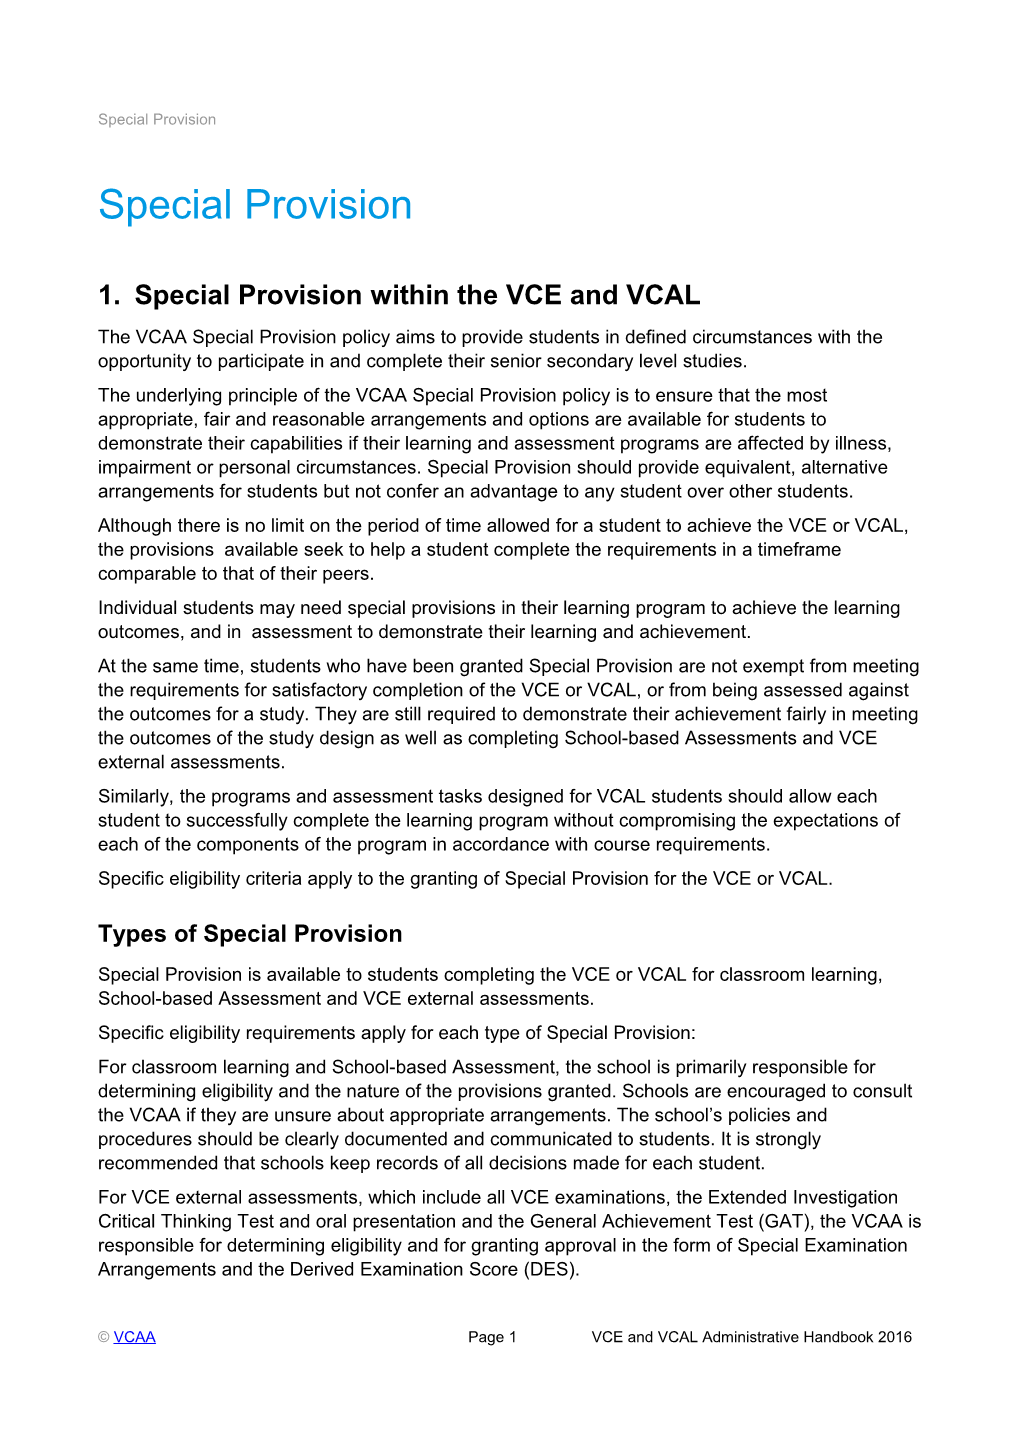 VCAA Page 2 VCE and VCAL Administrative Handbook 2016